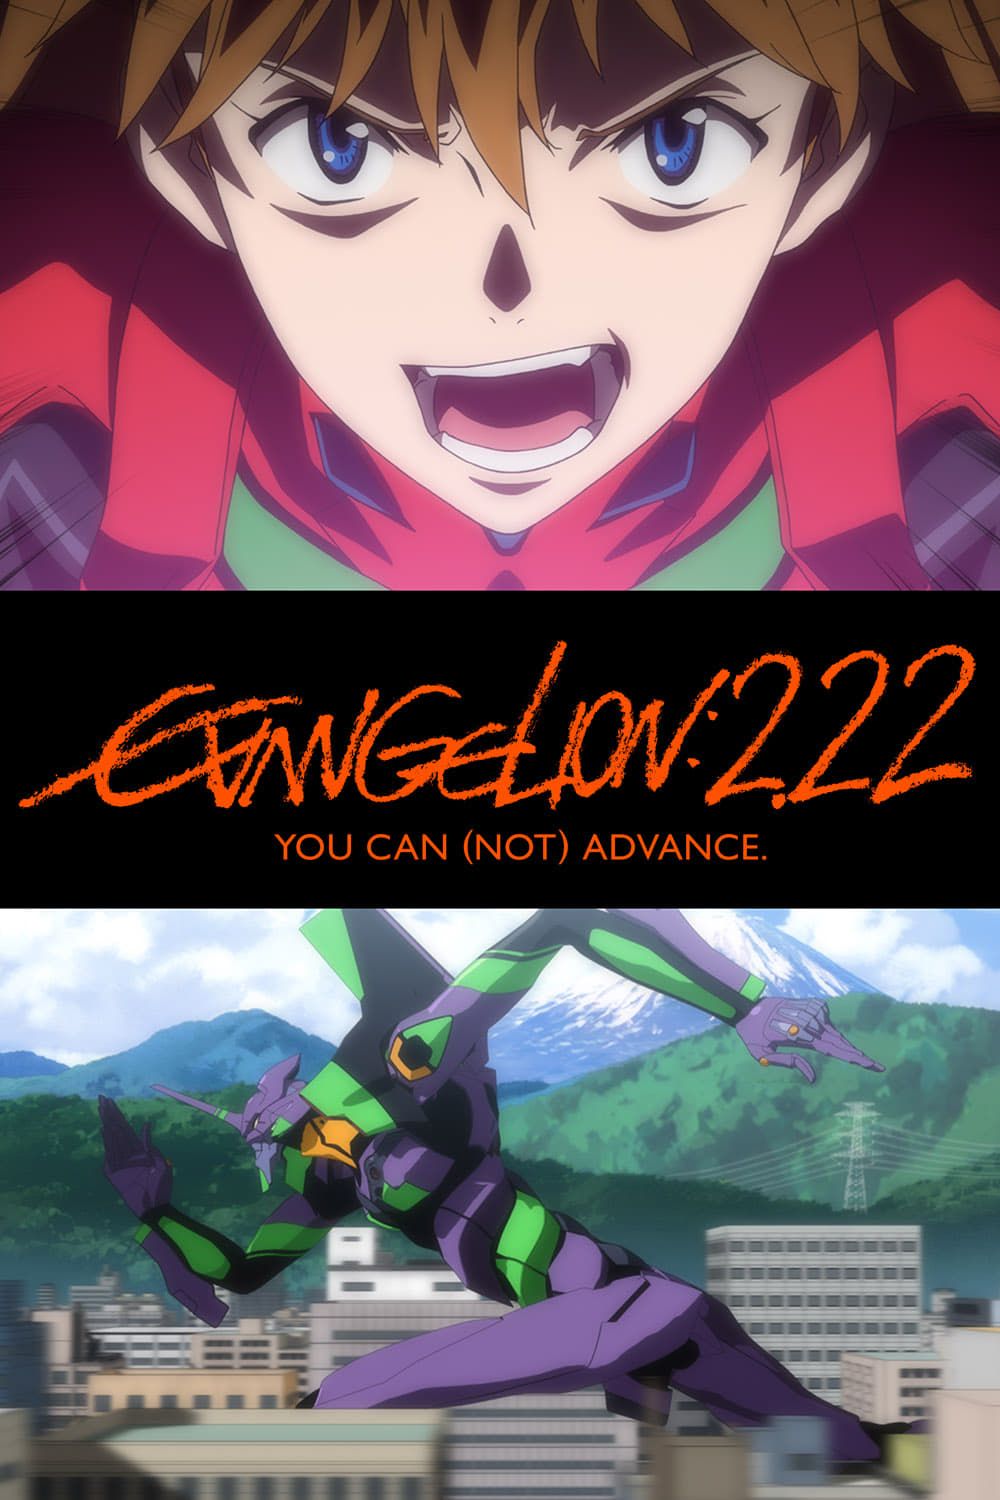 Evangelion 2.0: You Can (Not) Advance